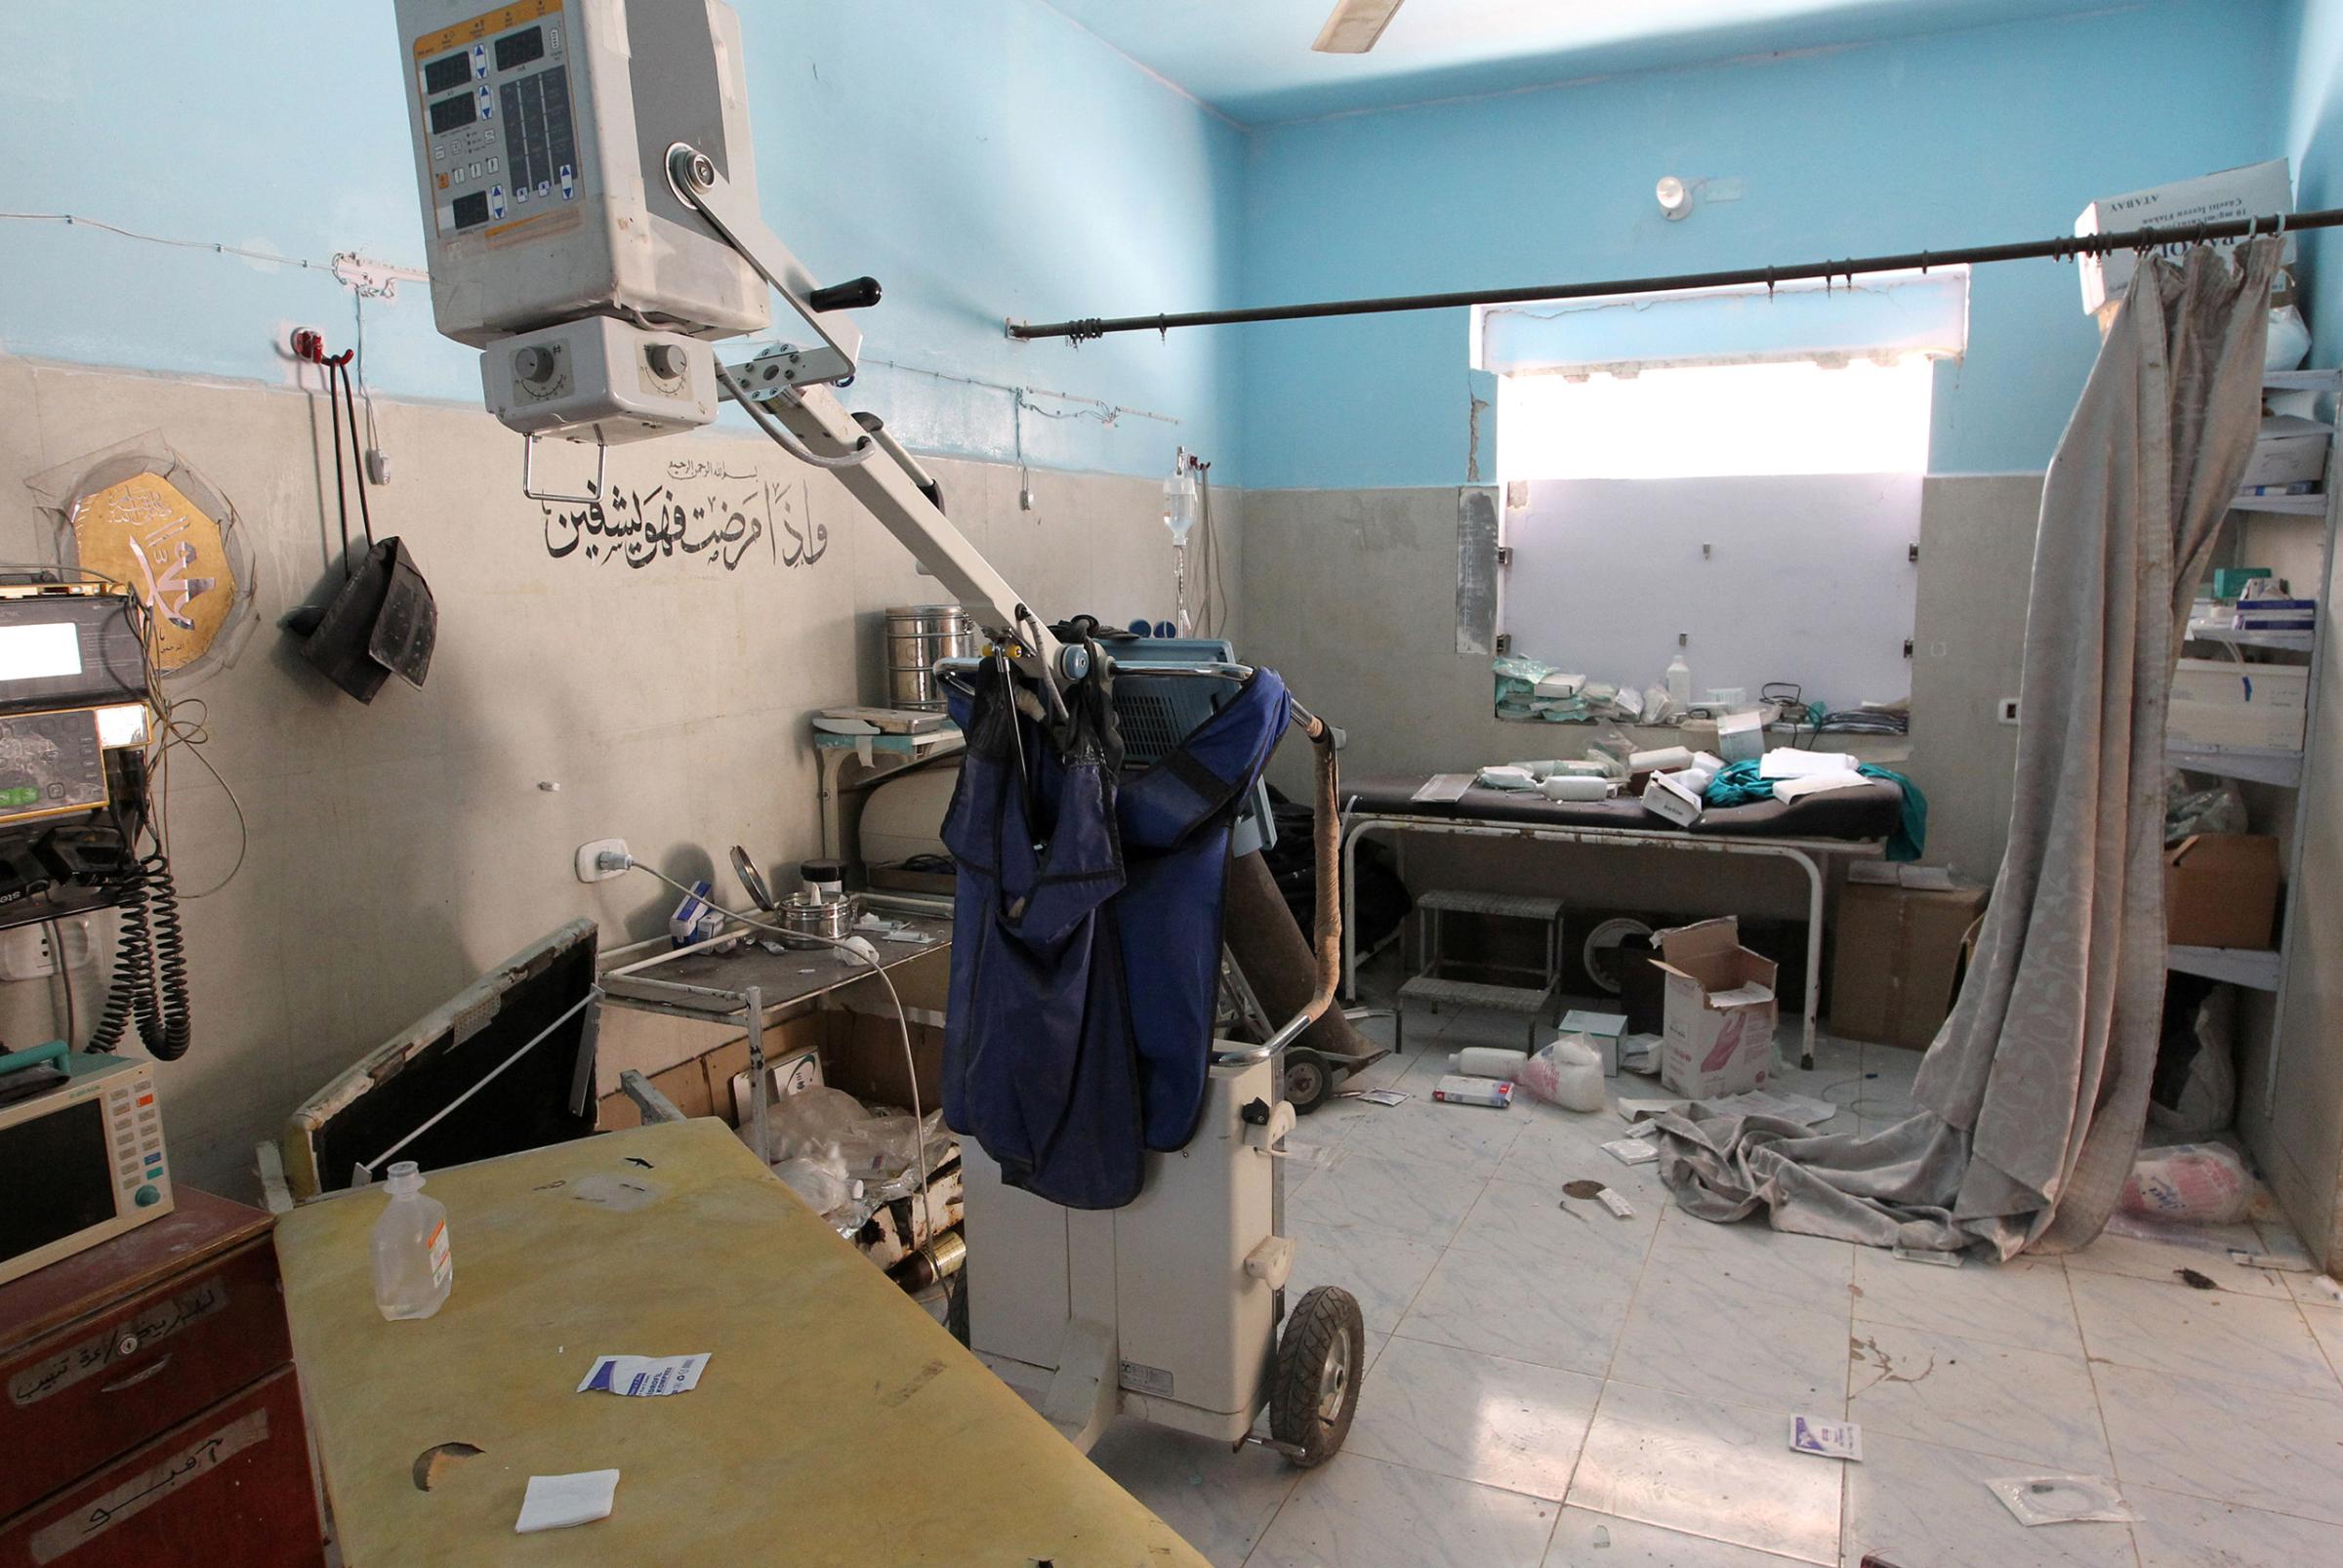 A video screengrab shows the damage inside Anadan Hospital, sponsored by Union of Medical Care and Relief Organizations (UOSSM), after it was hit by an airstrike in the rebel held city of Anadan, northern Aleppo province, Syria, on July 31, 2016.